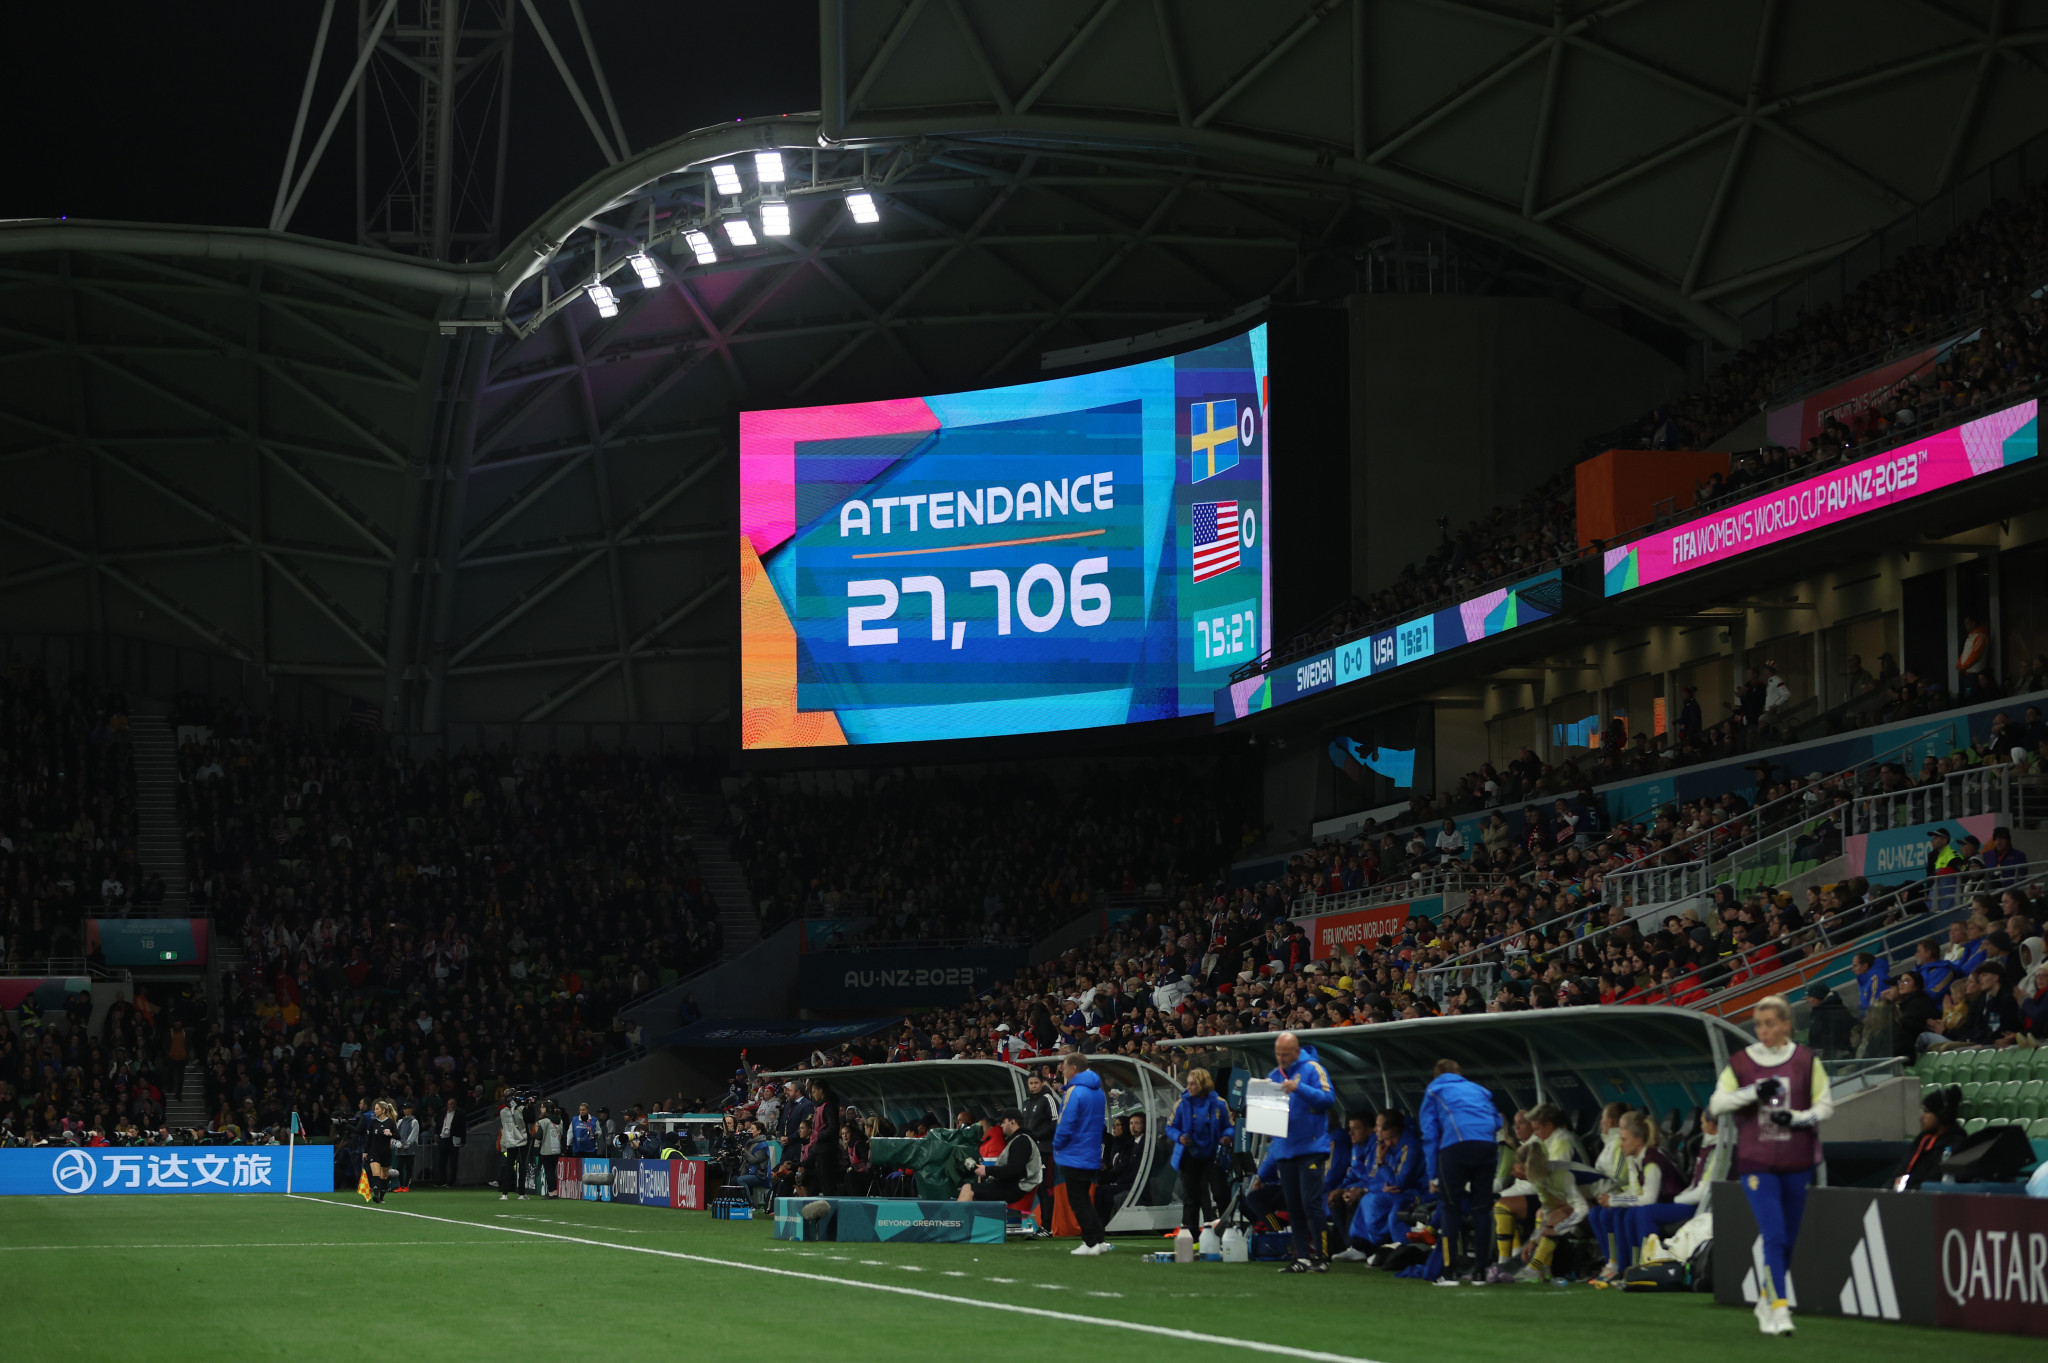 More than 27,000 fans watched the action at the Melbourne Rectangular Stadium in the eagerly-anticipated round-of-16 contest between Sweden and the United States ©Getty Images